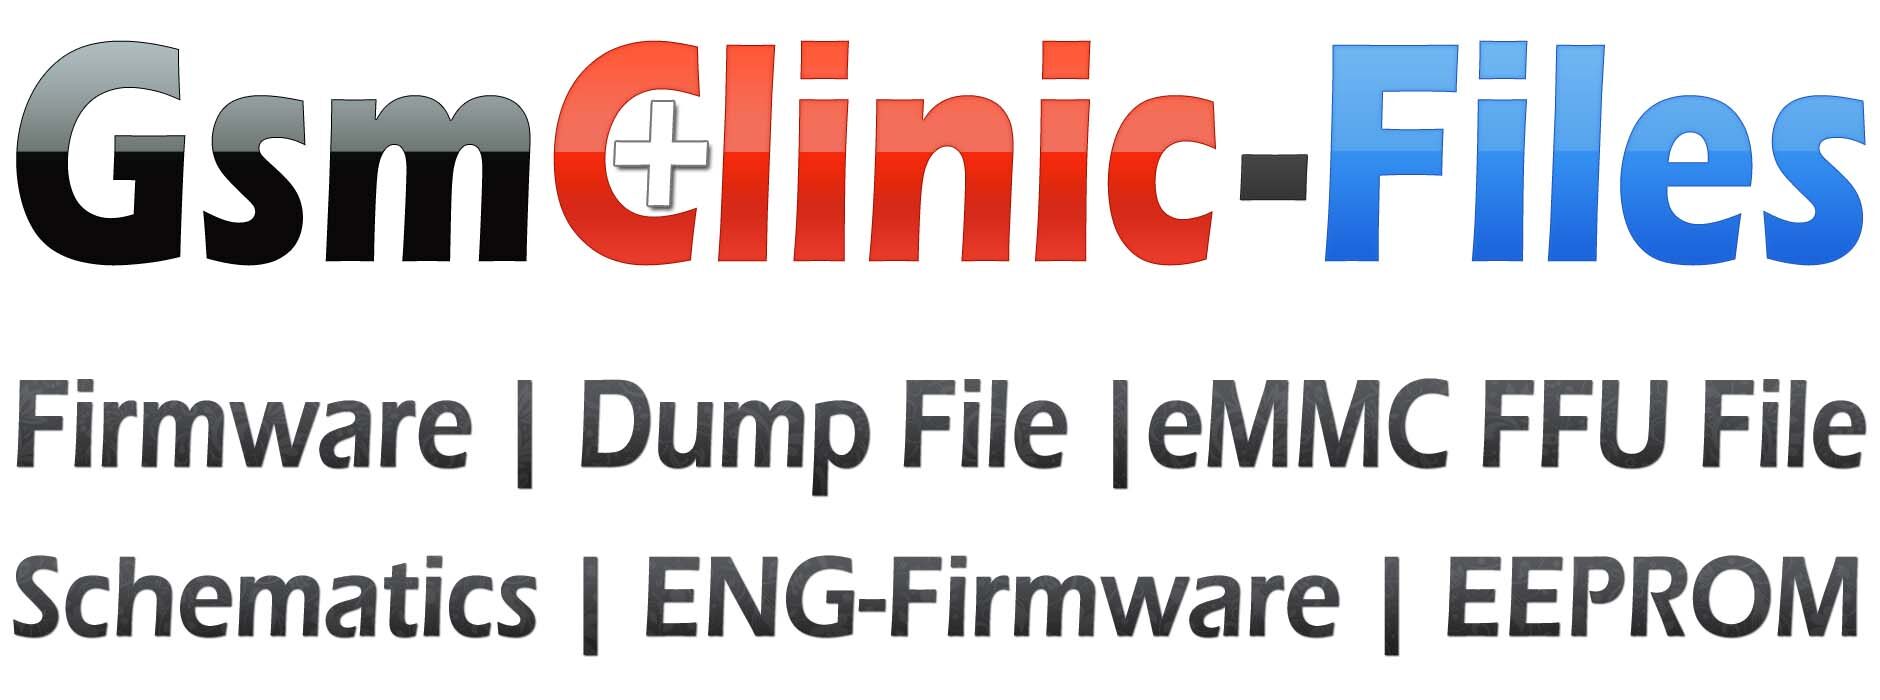 GsmClinic Download Section